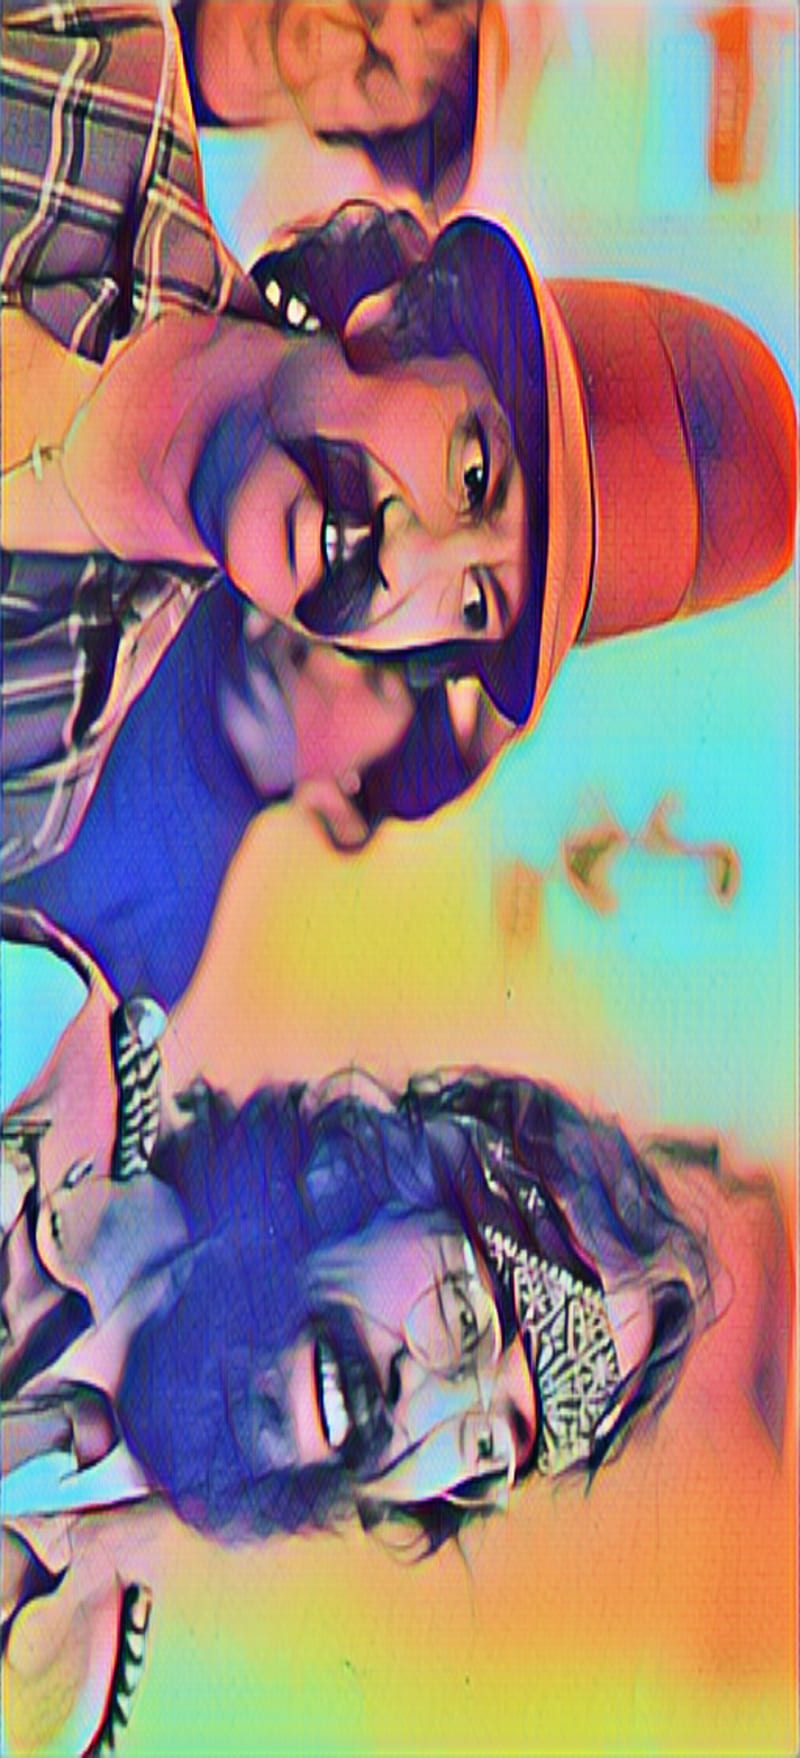 mucho gusto, cheech and chong, up in smoke, man, happy little trees, tide stick, labrador, great outdoors, yesca, muf dvr, love machine, HD phone wallpaper